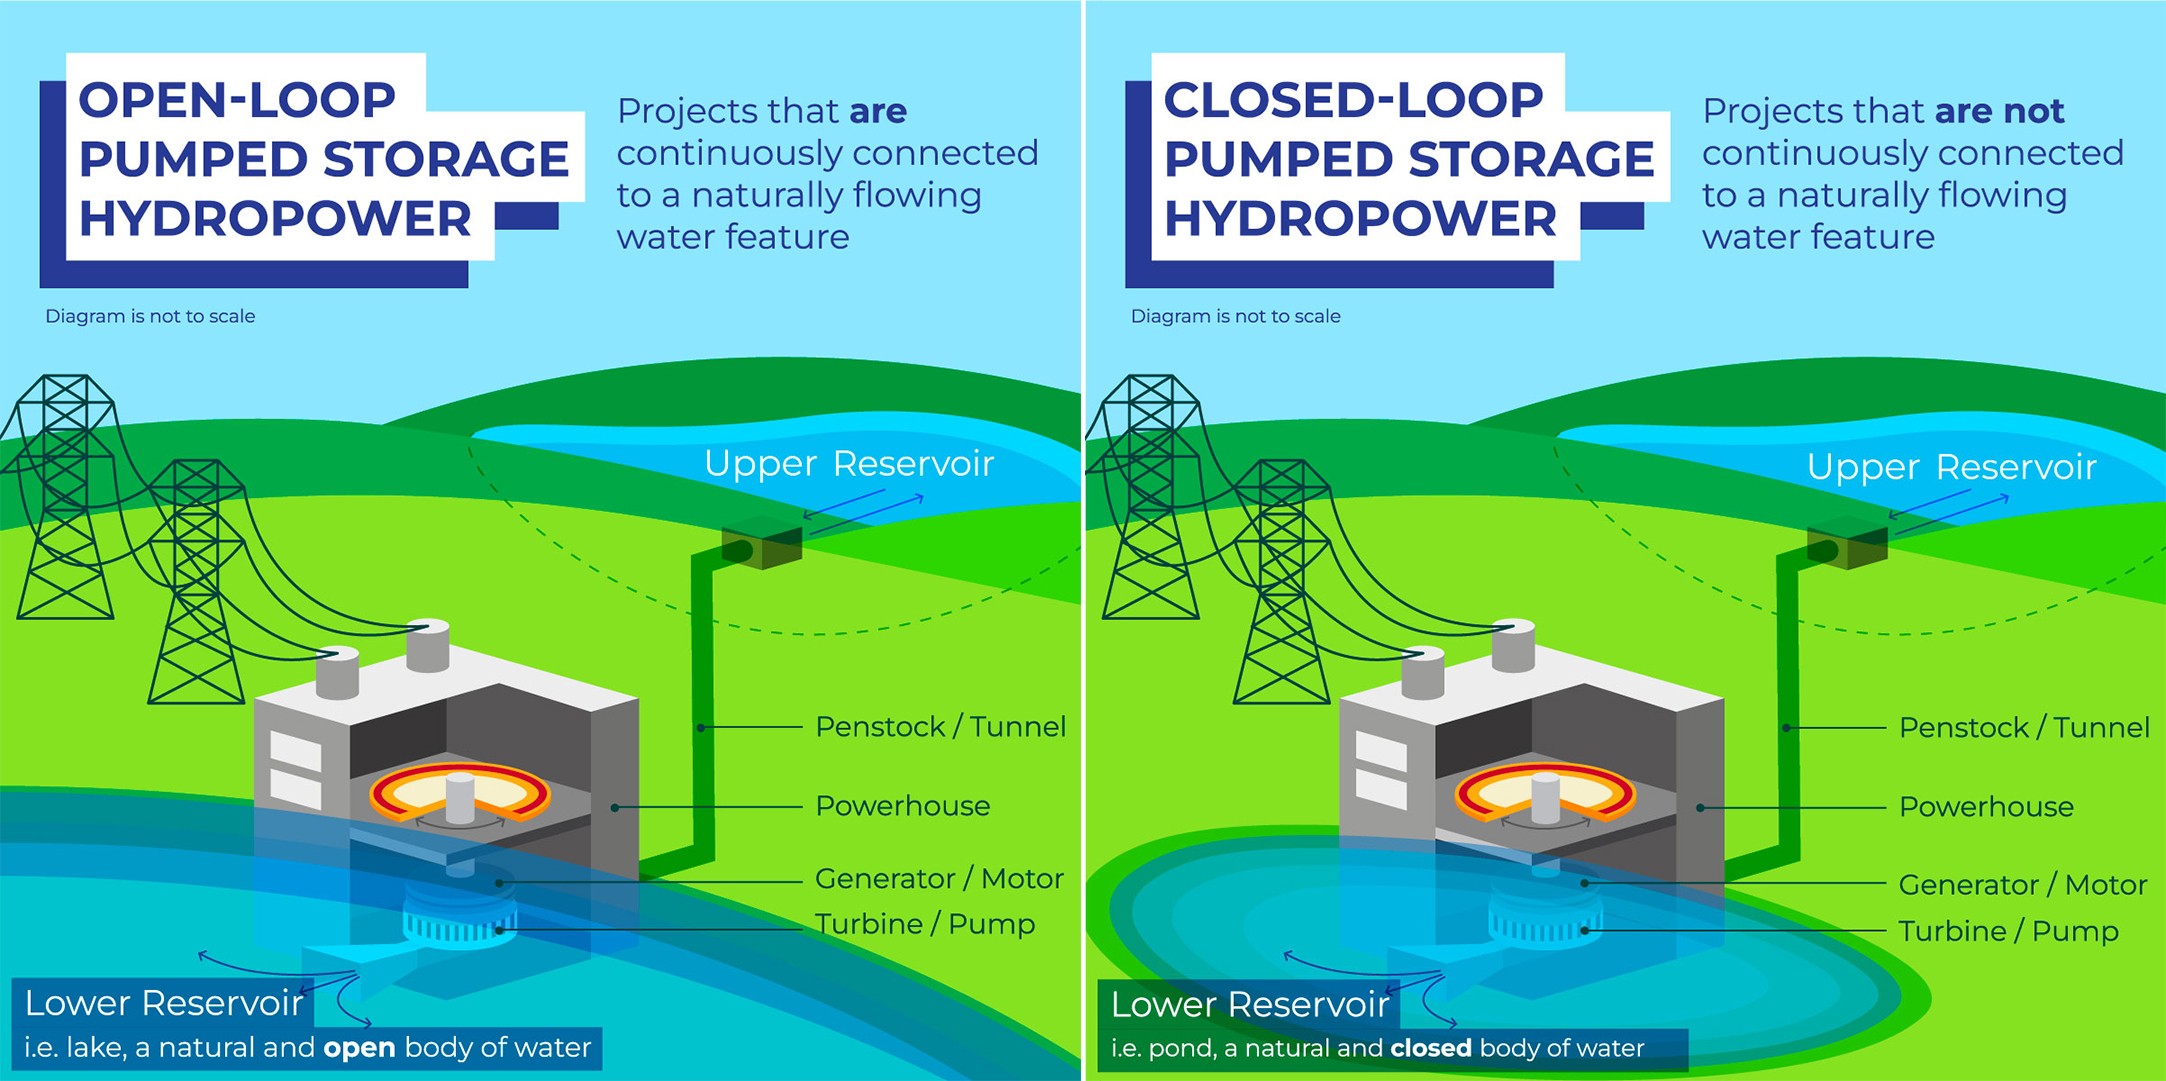 An illustration showing the Marmora Pumped Storage Project